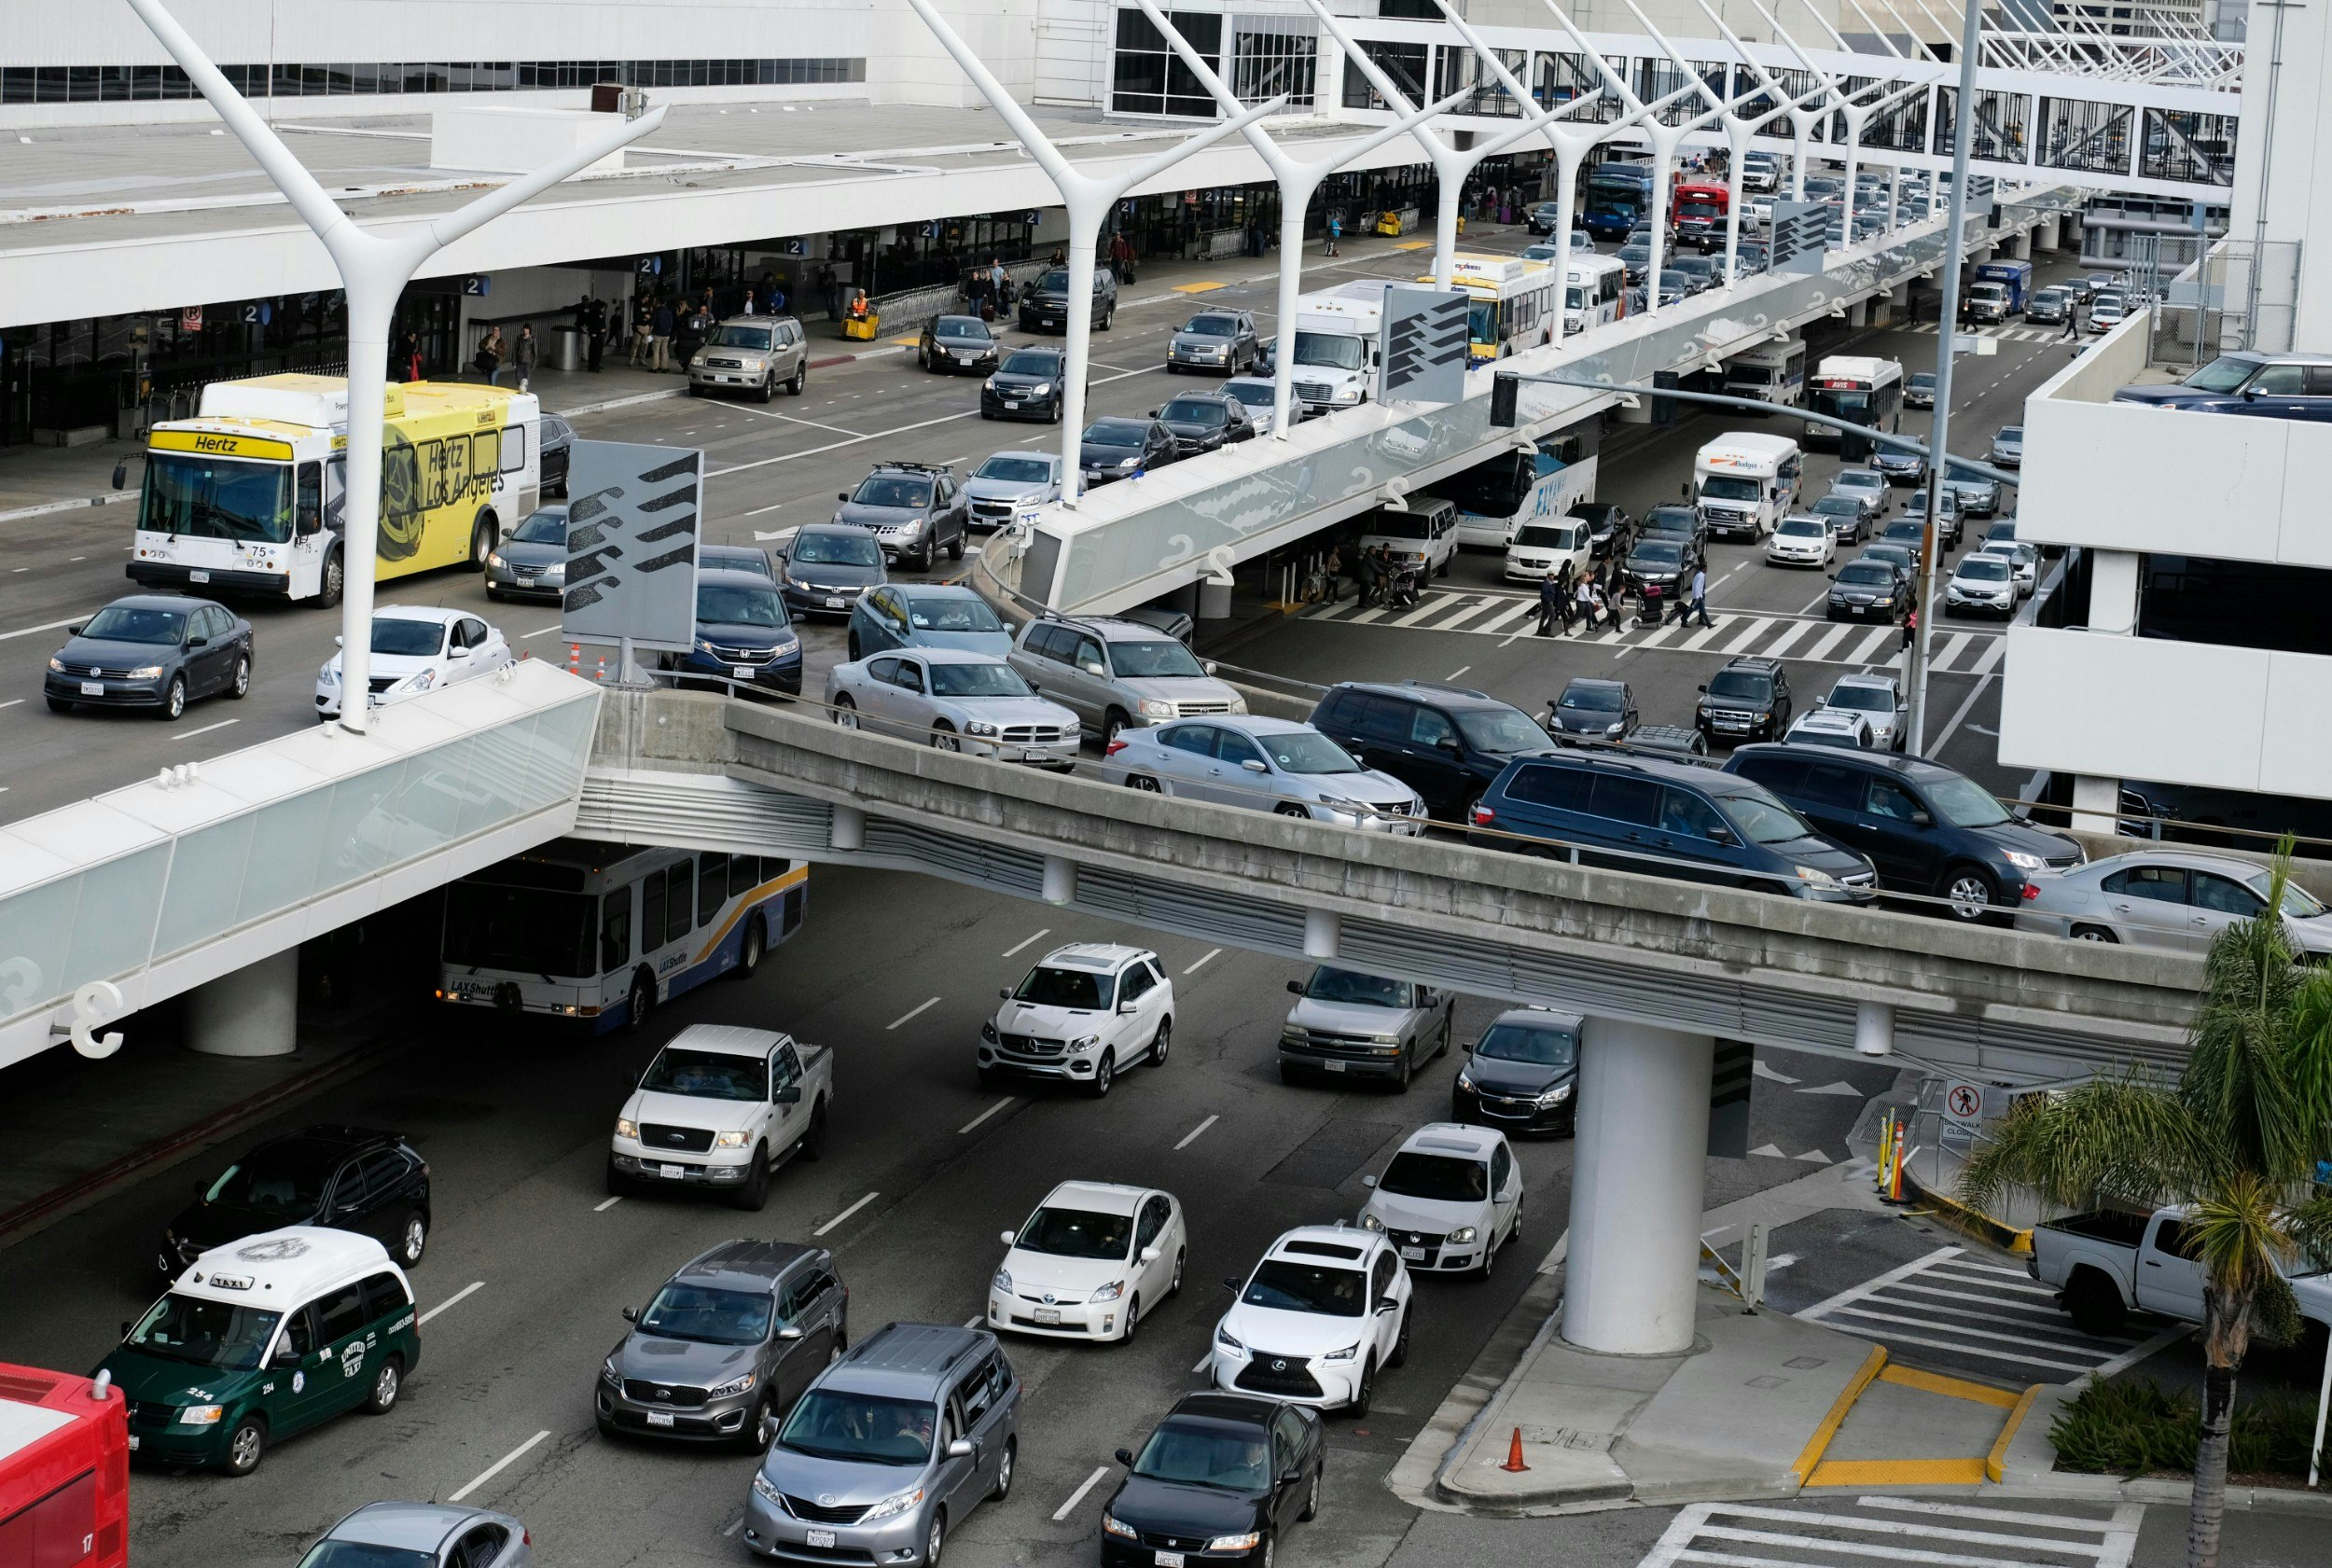 Congested traffic at LAX airport